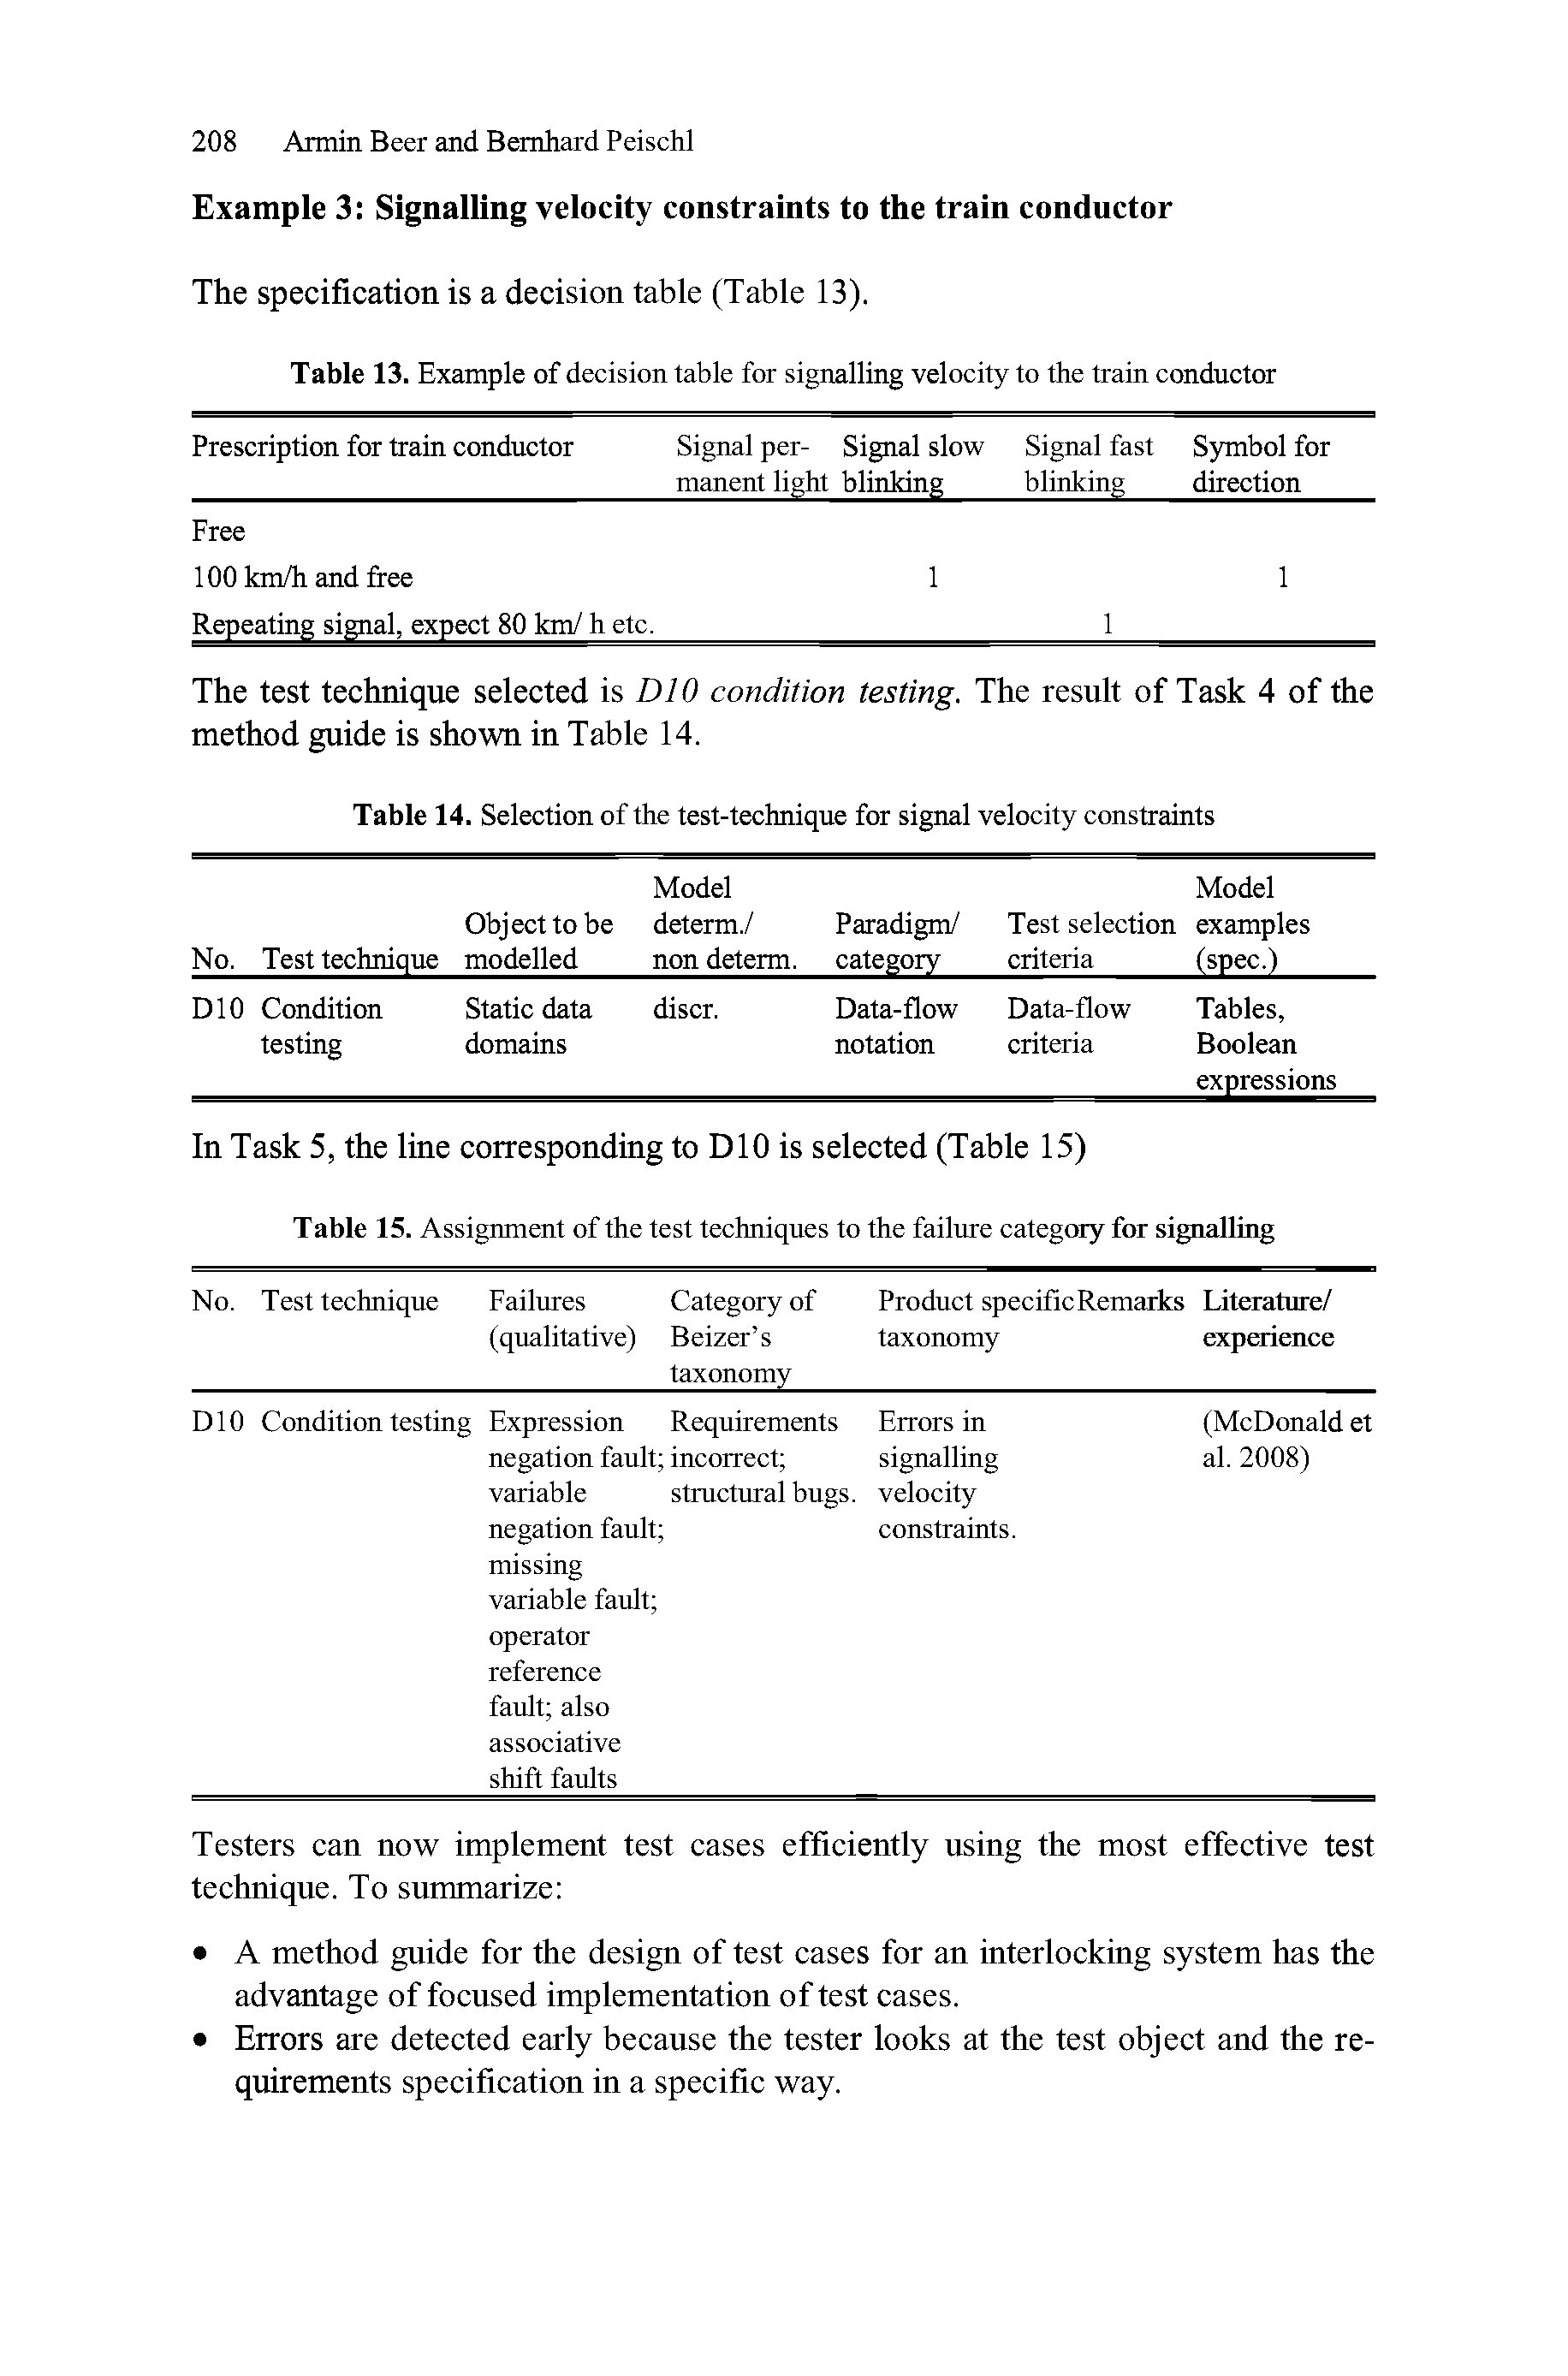 Table 14. Selection of the test-technique for signal velocity constraints...